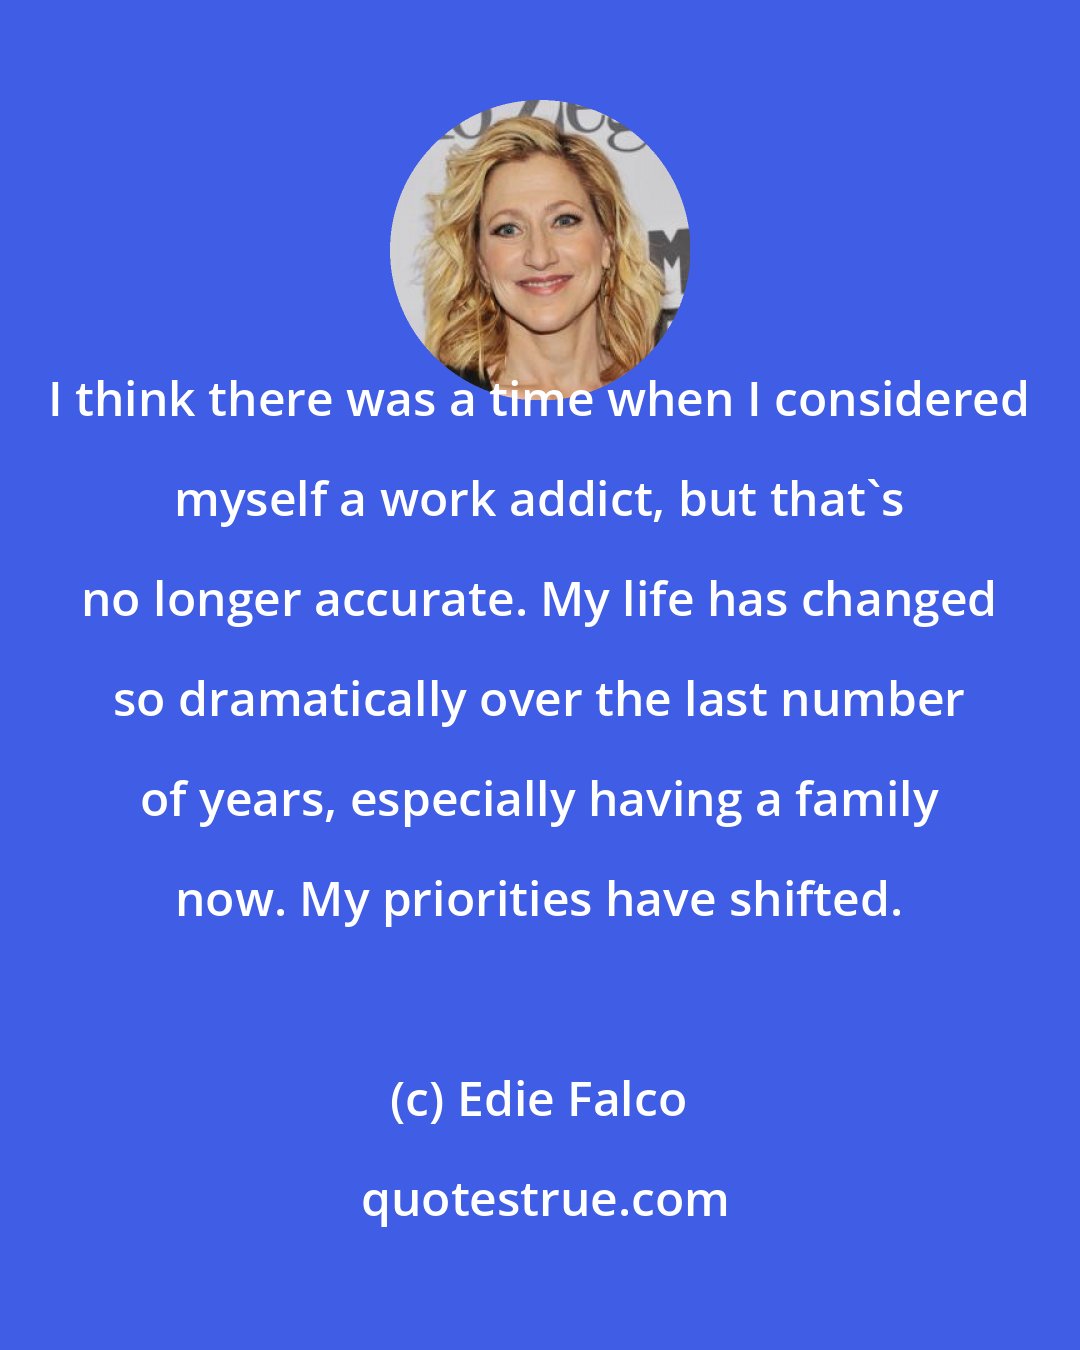 Edie Falco: I think there was a time when I considered myself a work addict, but that's no longer accurate. My life has changed so dramatically over the last number of years, especially having a family now. My priorities have shifted.